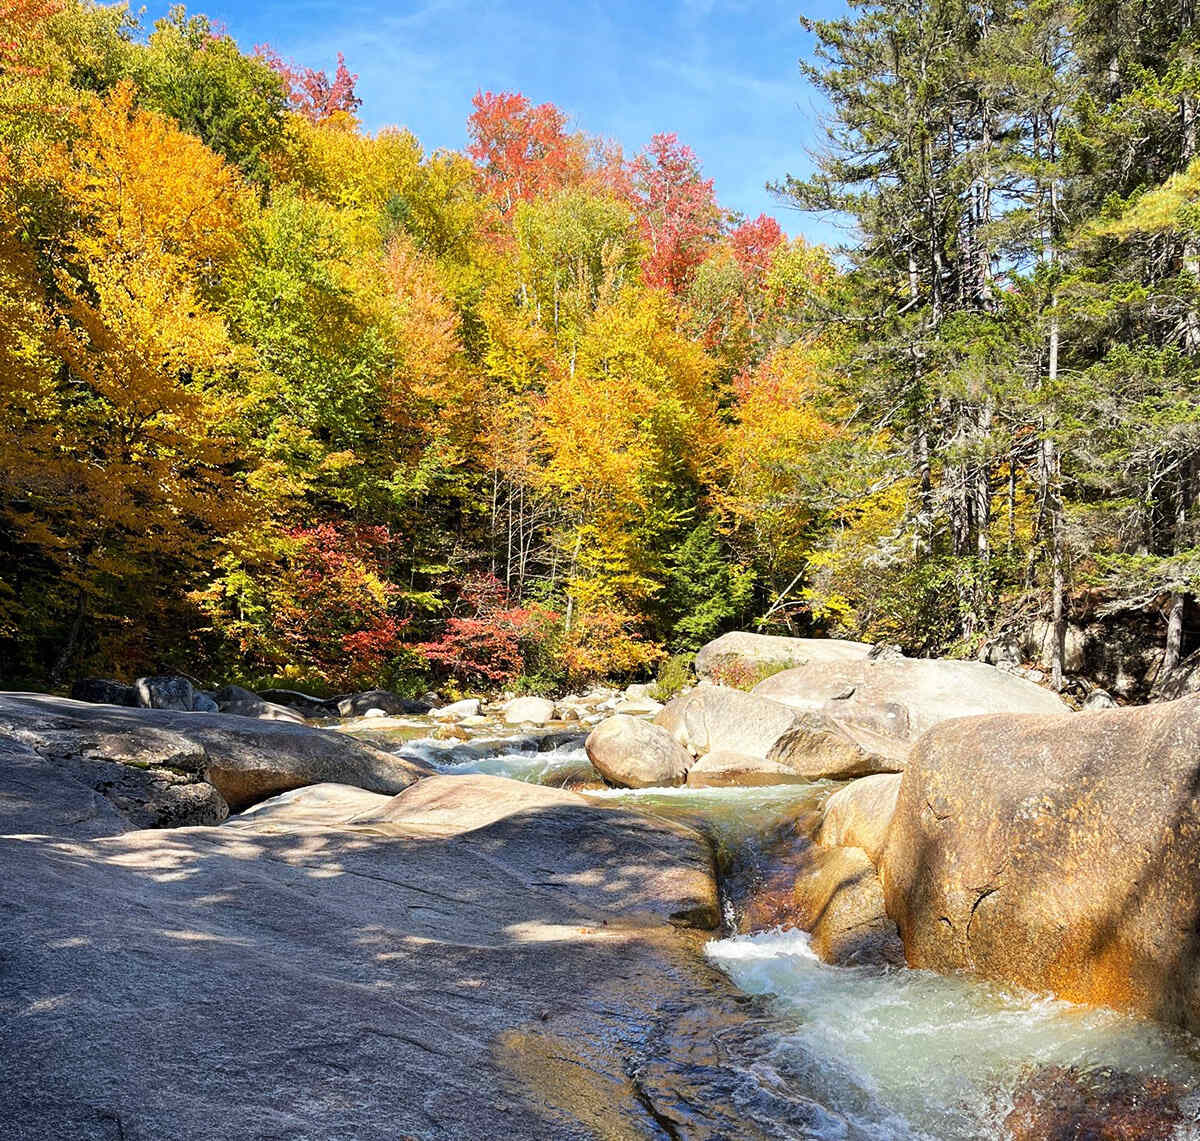 The complete guide to the Kancamagus Highway